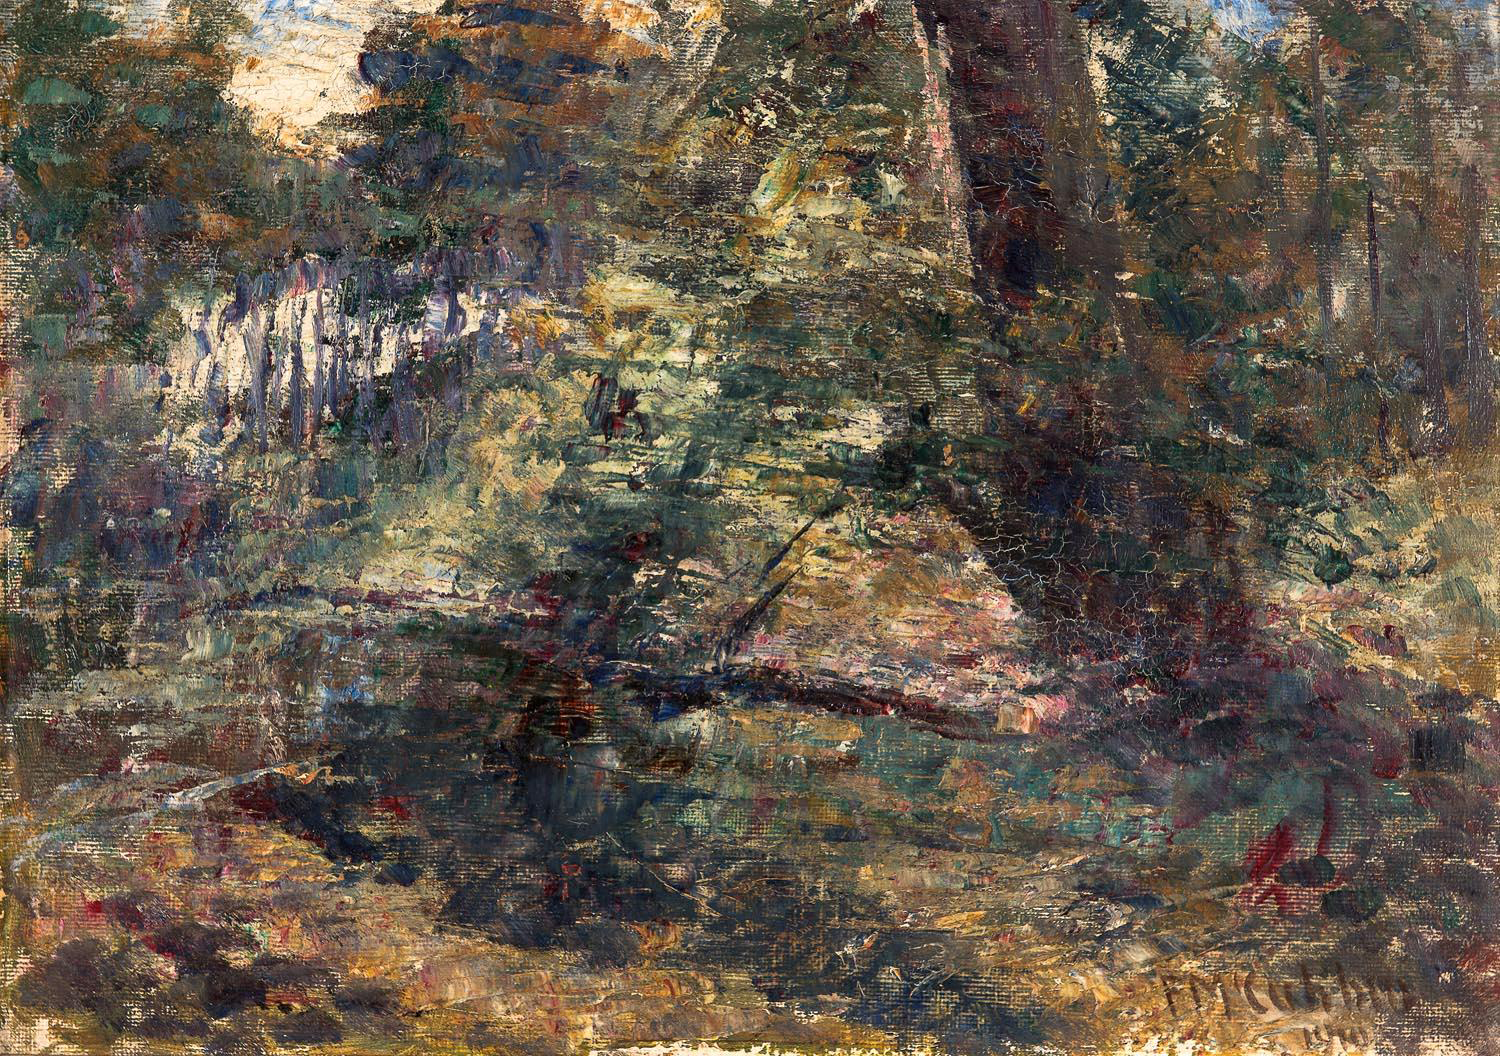 Mossgreen Auctions will auction the  collection of the late Suzanne Cecil, descended from Henry Buck of the menswear retailers, on 15 May. Included in the sale amongst other art, is Frederick McCubbin's, 'Bush Landscape' 1910 which was a wedding gift to Suzanne and her husband in 1941 from the McCubbin family.